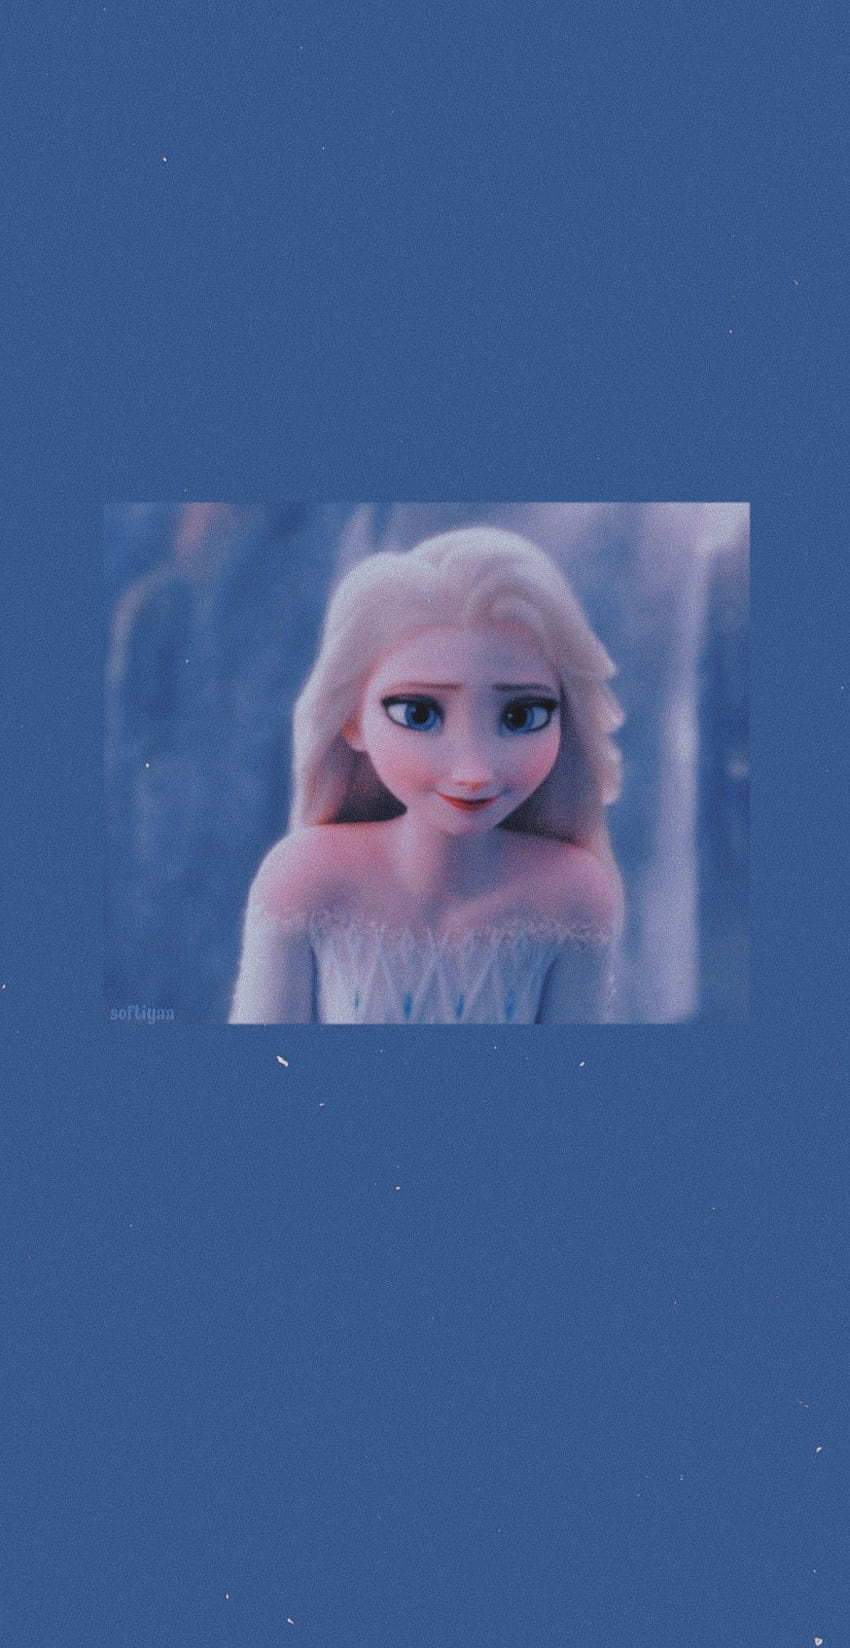 A frozen character is on the screen - Elsa